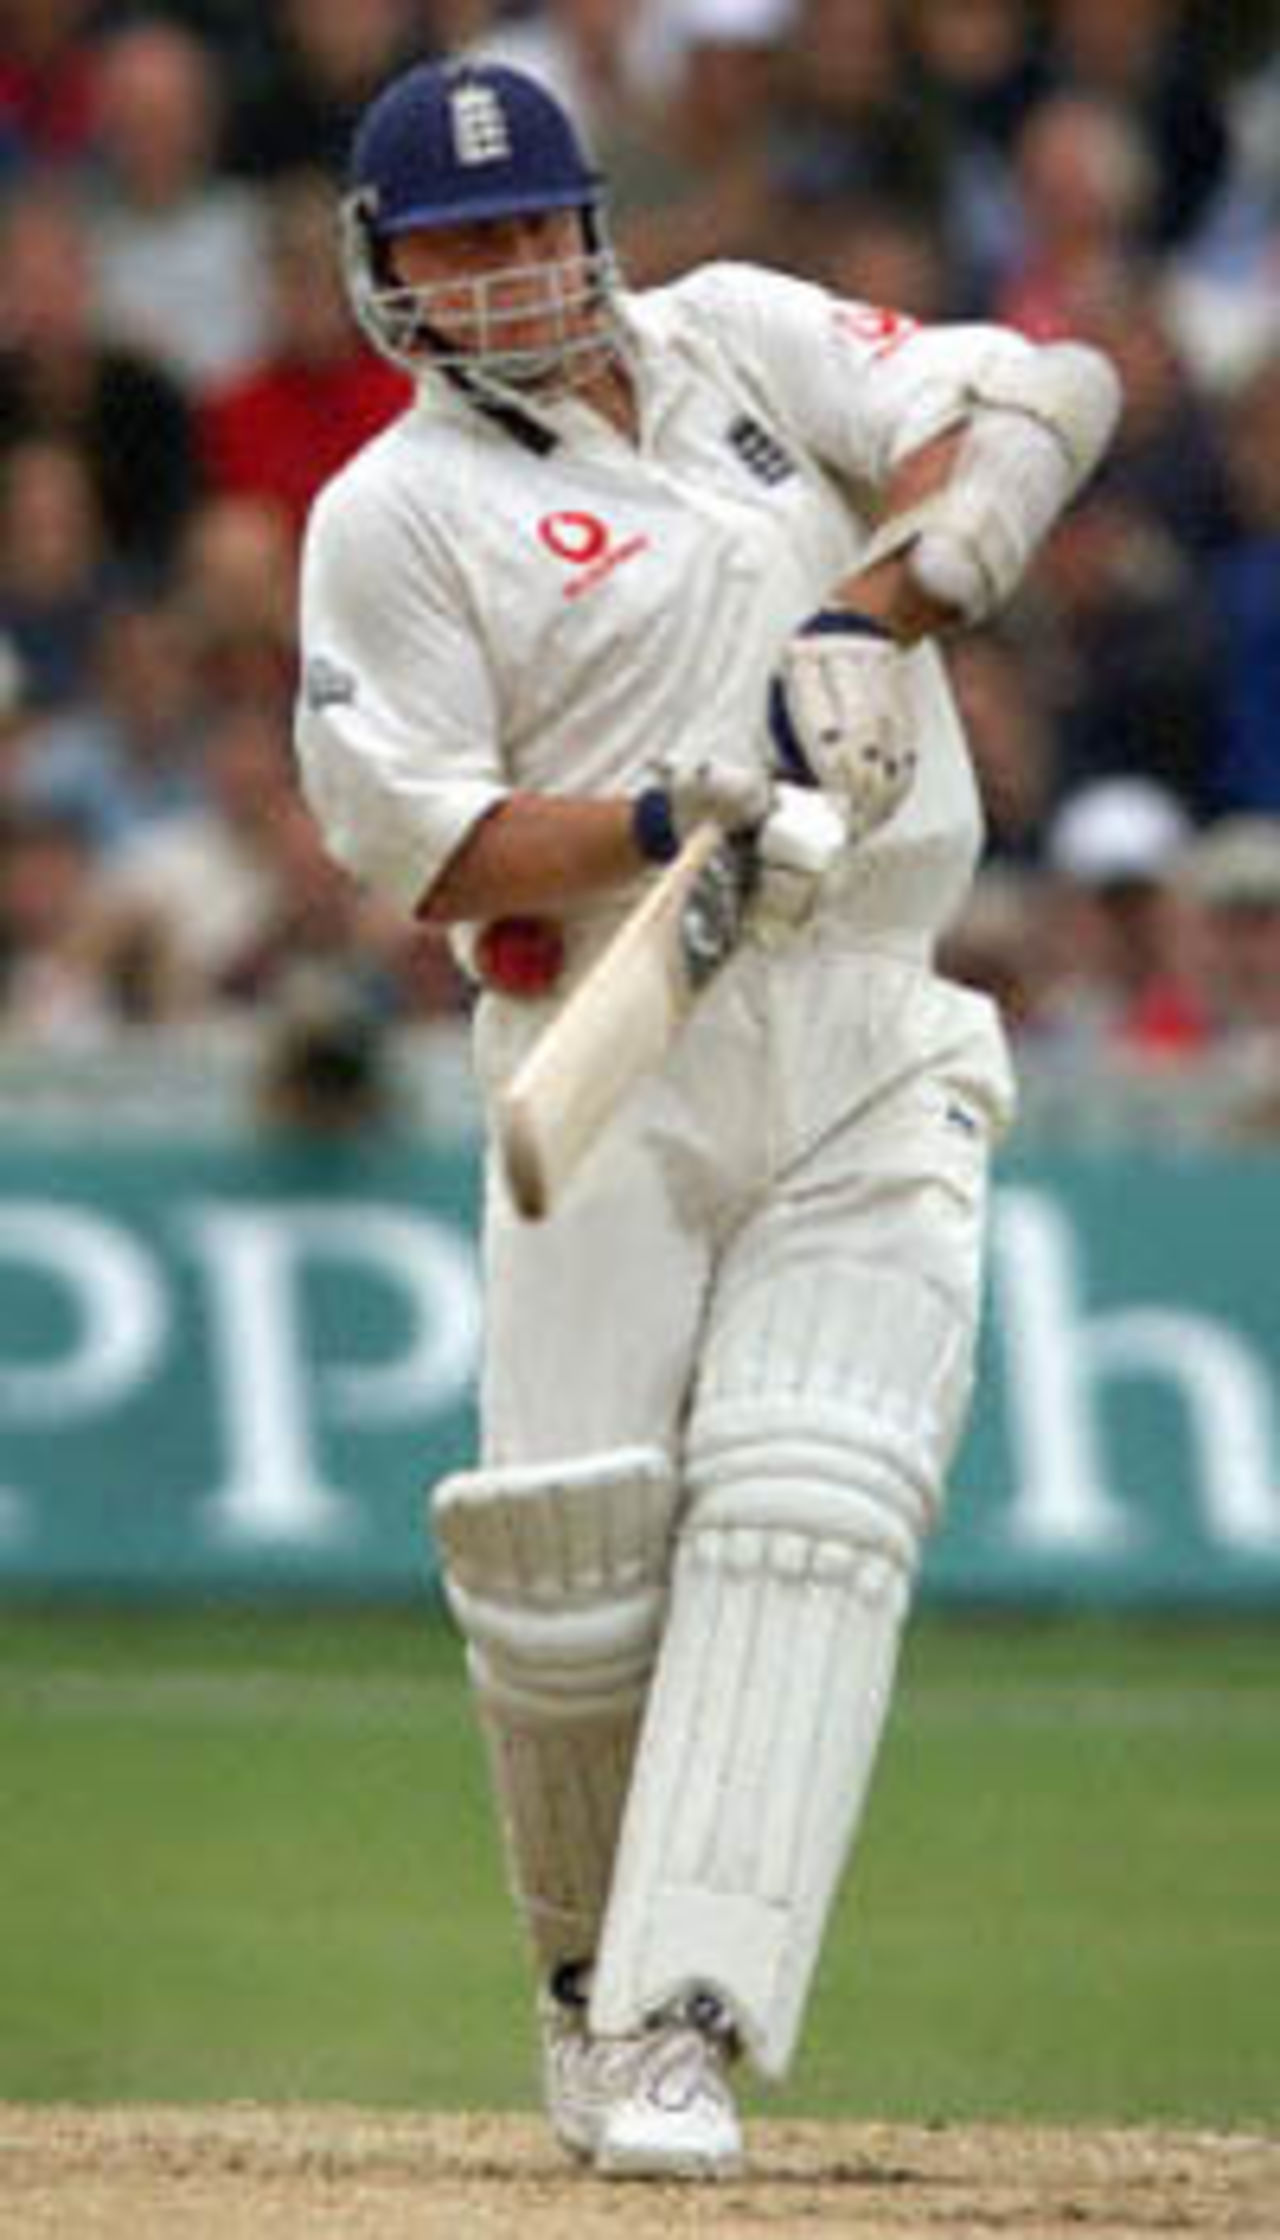 England's Darren Gough swings and misses the ball against the West Indies, during the first innings of the fifth Test at the Oval in London. Gough, the last man out, scored eight runs in England's total of 281. The Wisden Trophy, 2000, 5th Test, England v West Indies, Kennington Oval, London, 31Aug-04Sep 2000 (Day 2).